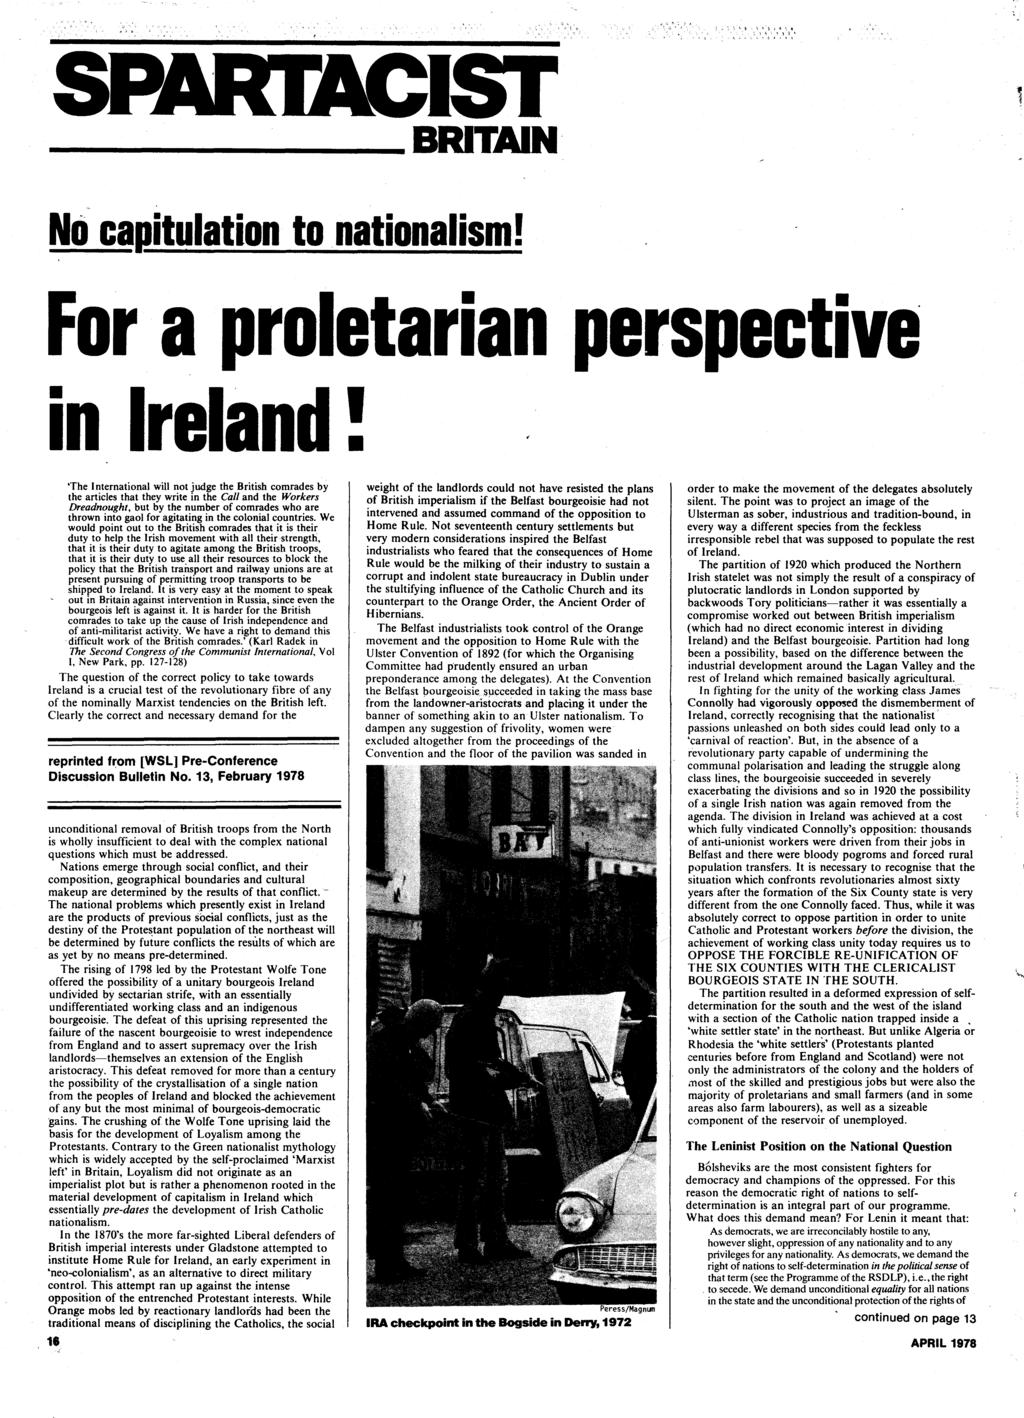 BRITAIN' No cagitulation to.nationalism! For a proletarian perspective in Ireland!